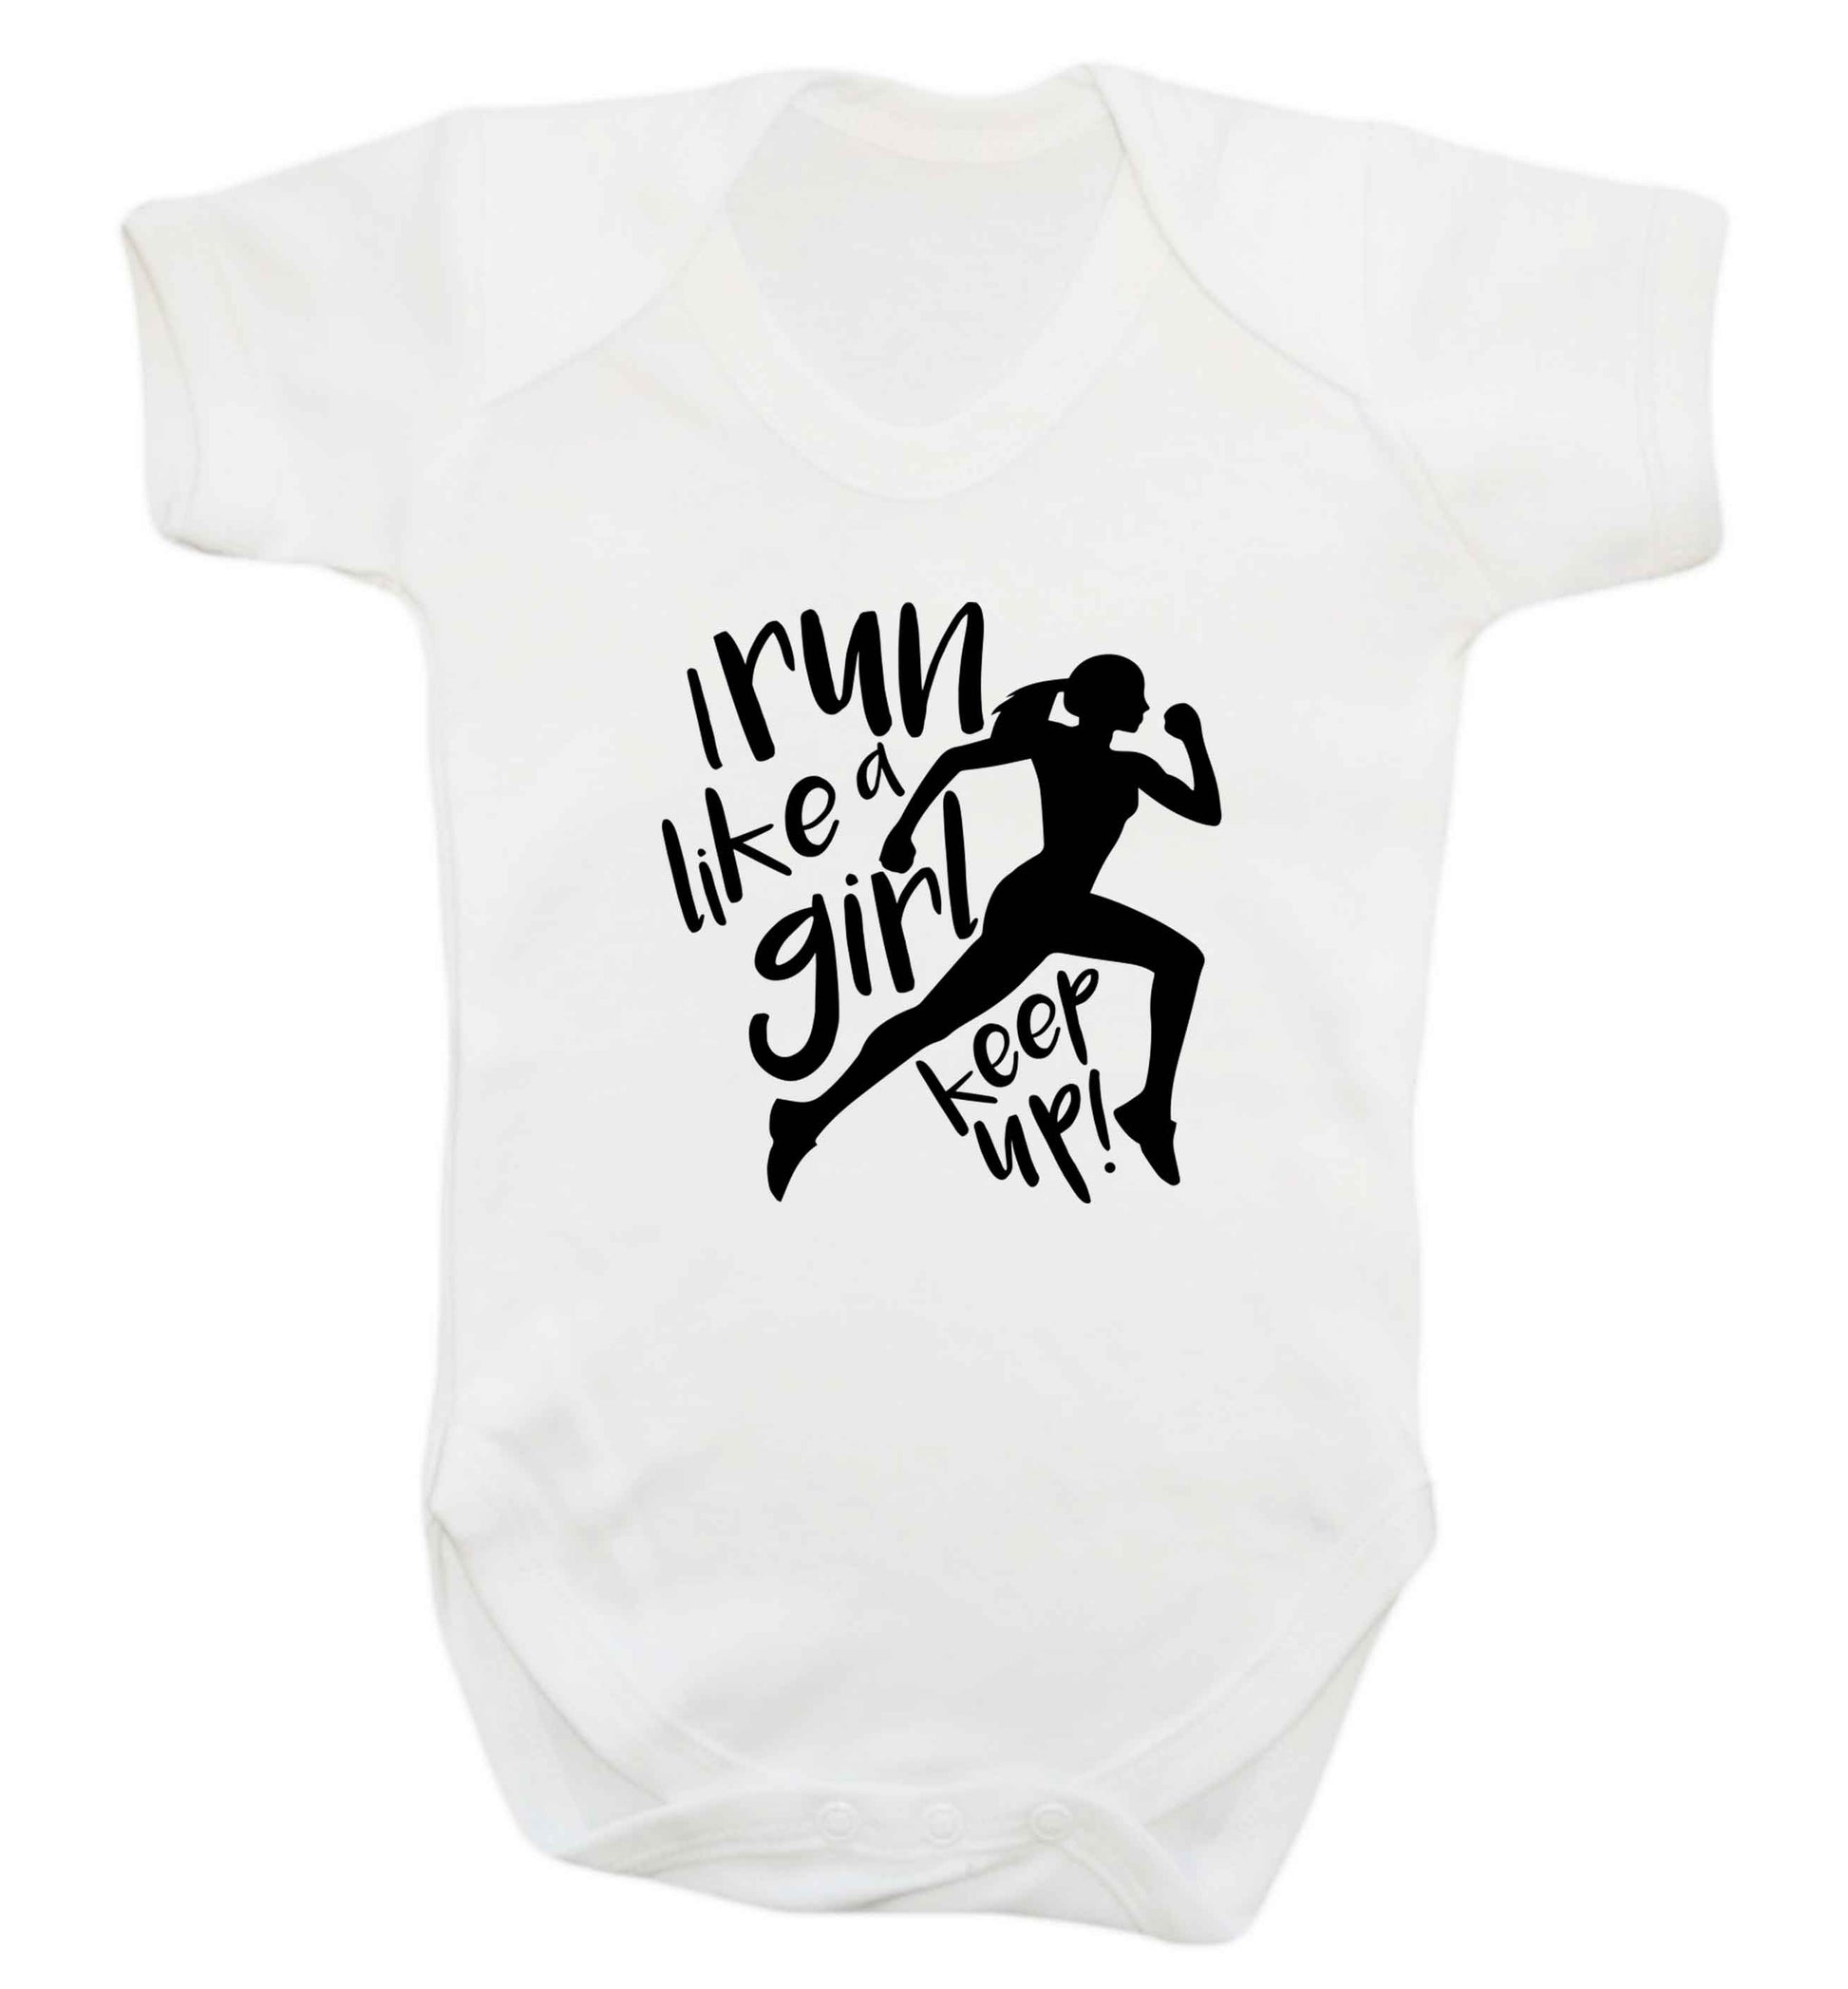 I run like a girl, keep up! baby vest white 18-24 months